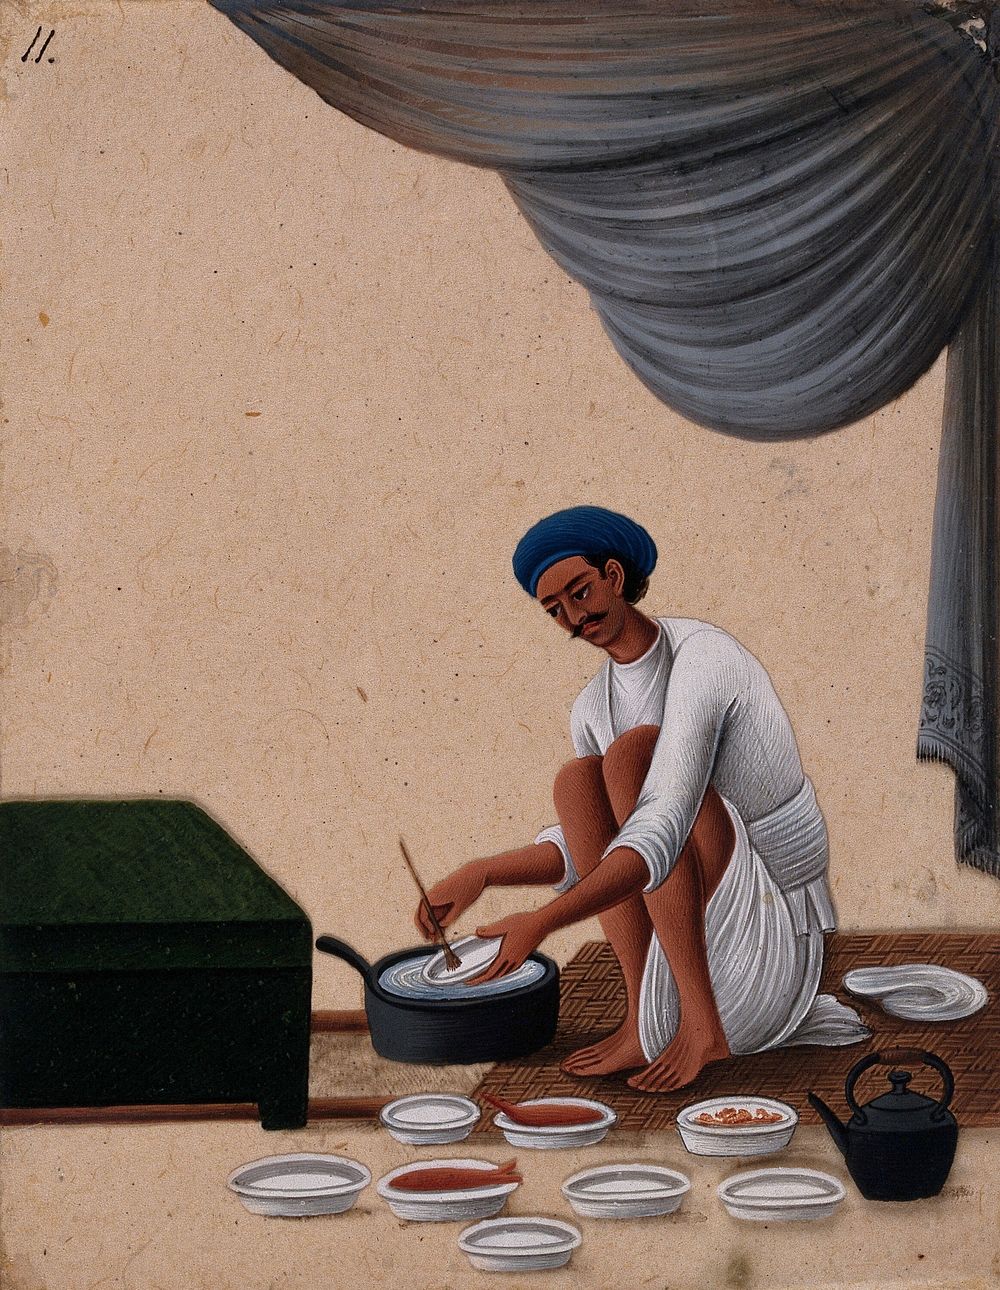 A man washing dishes. Gouache painting on mica by an Indian artist.